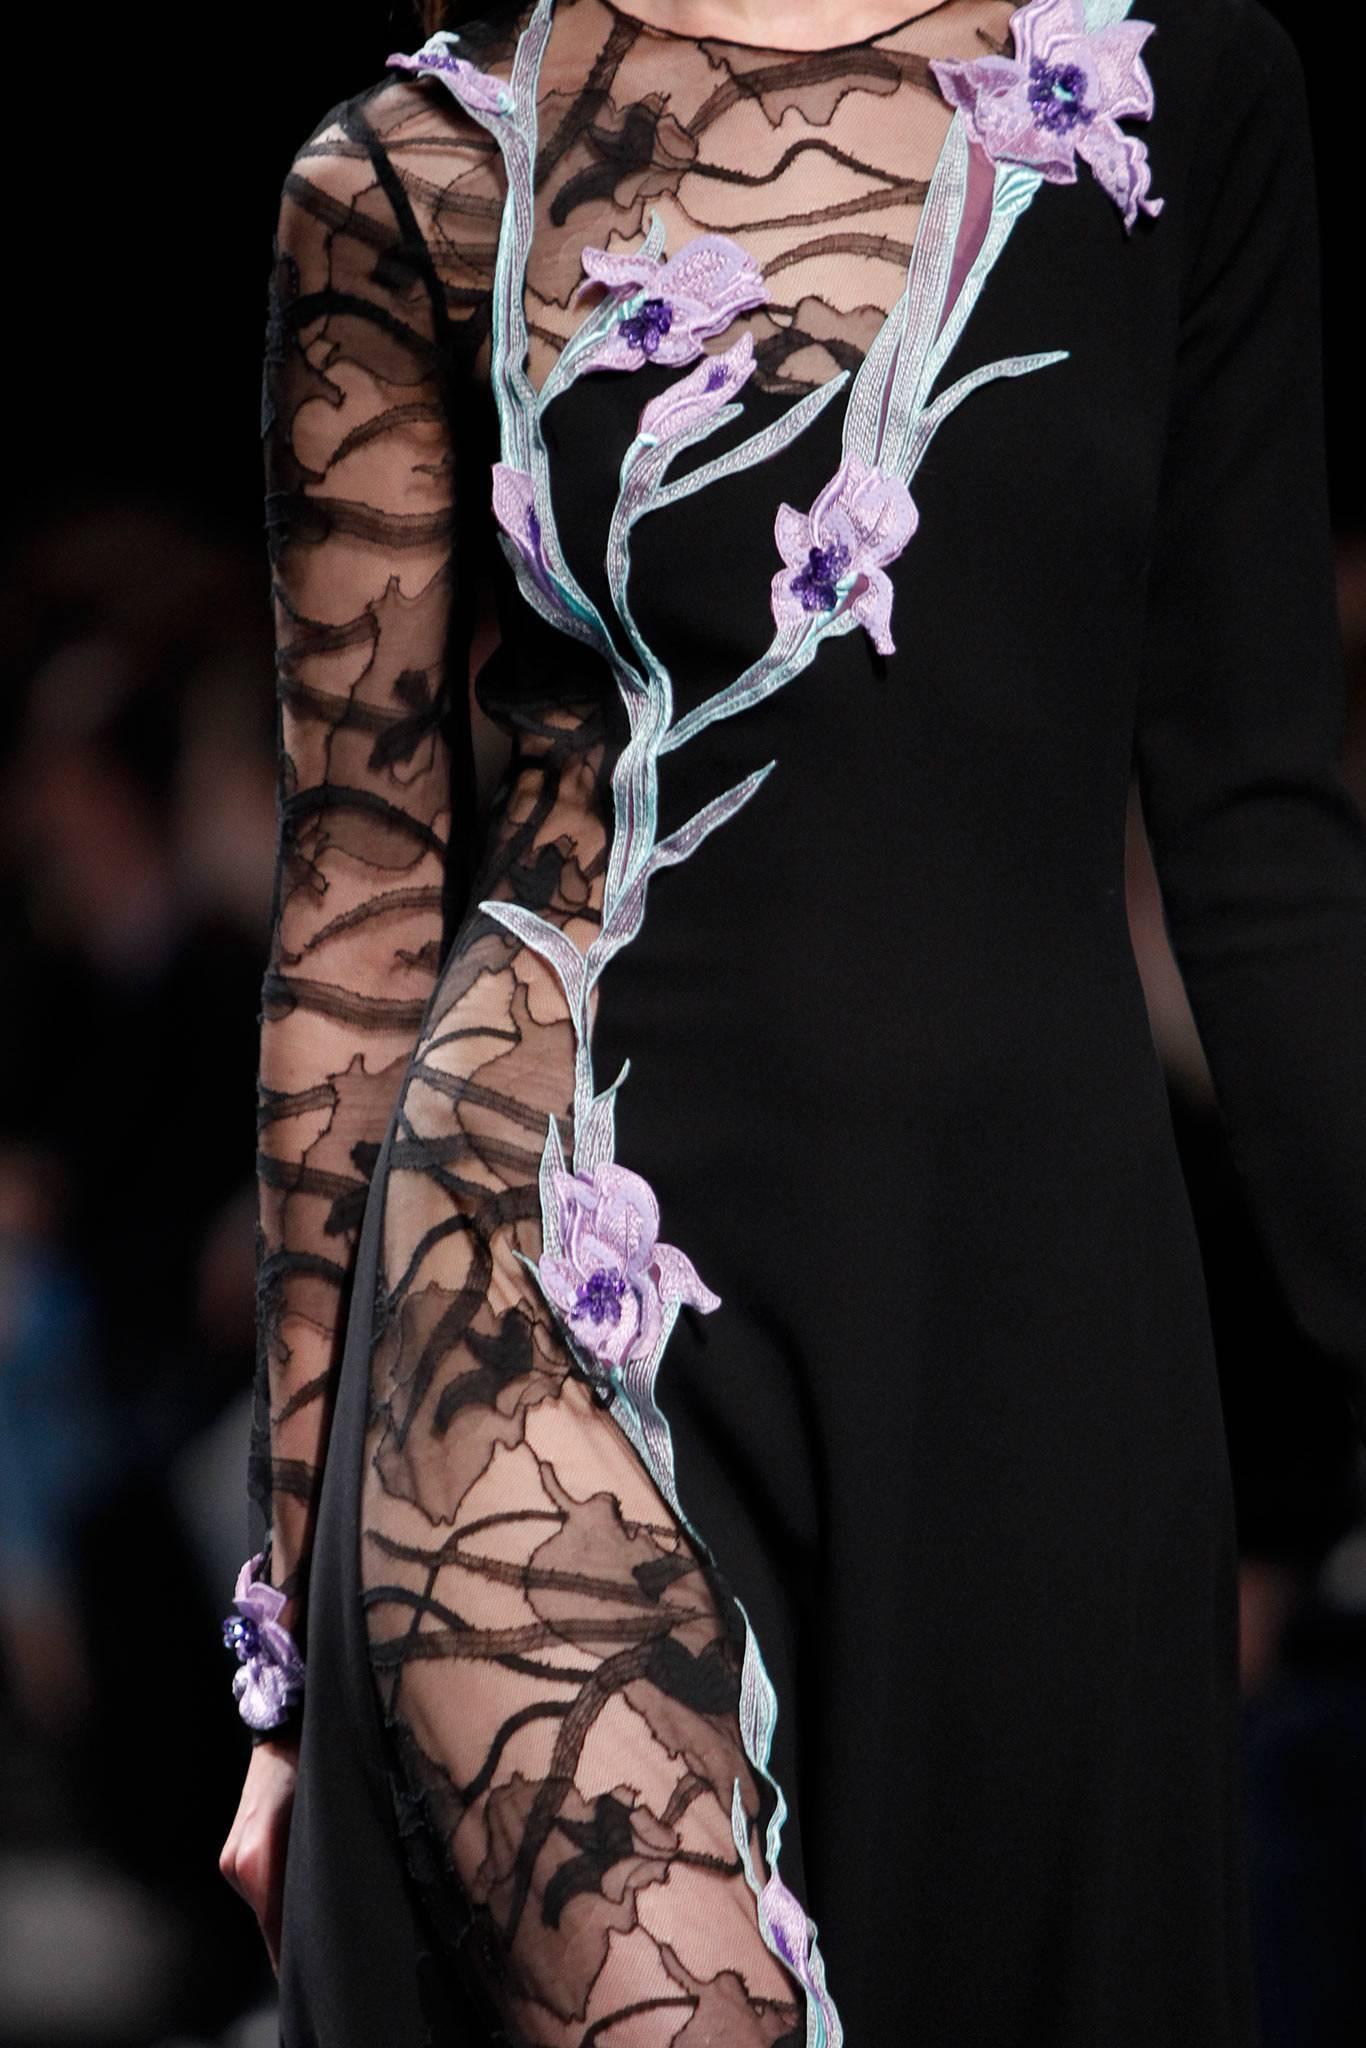 Women's Nina Ricci 2014 Black Gown - lace embroidered flowers